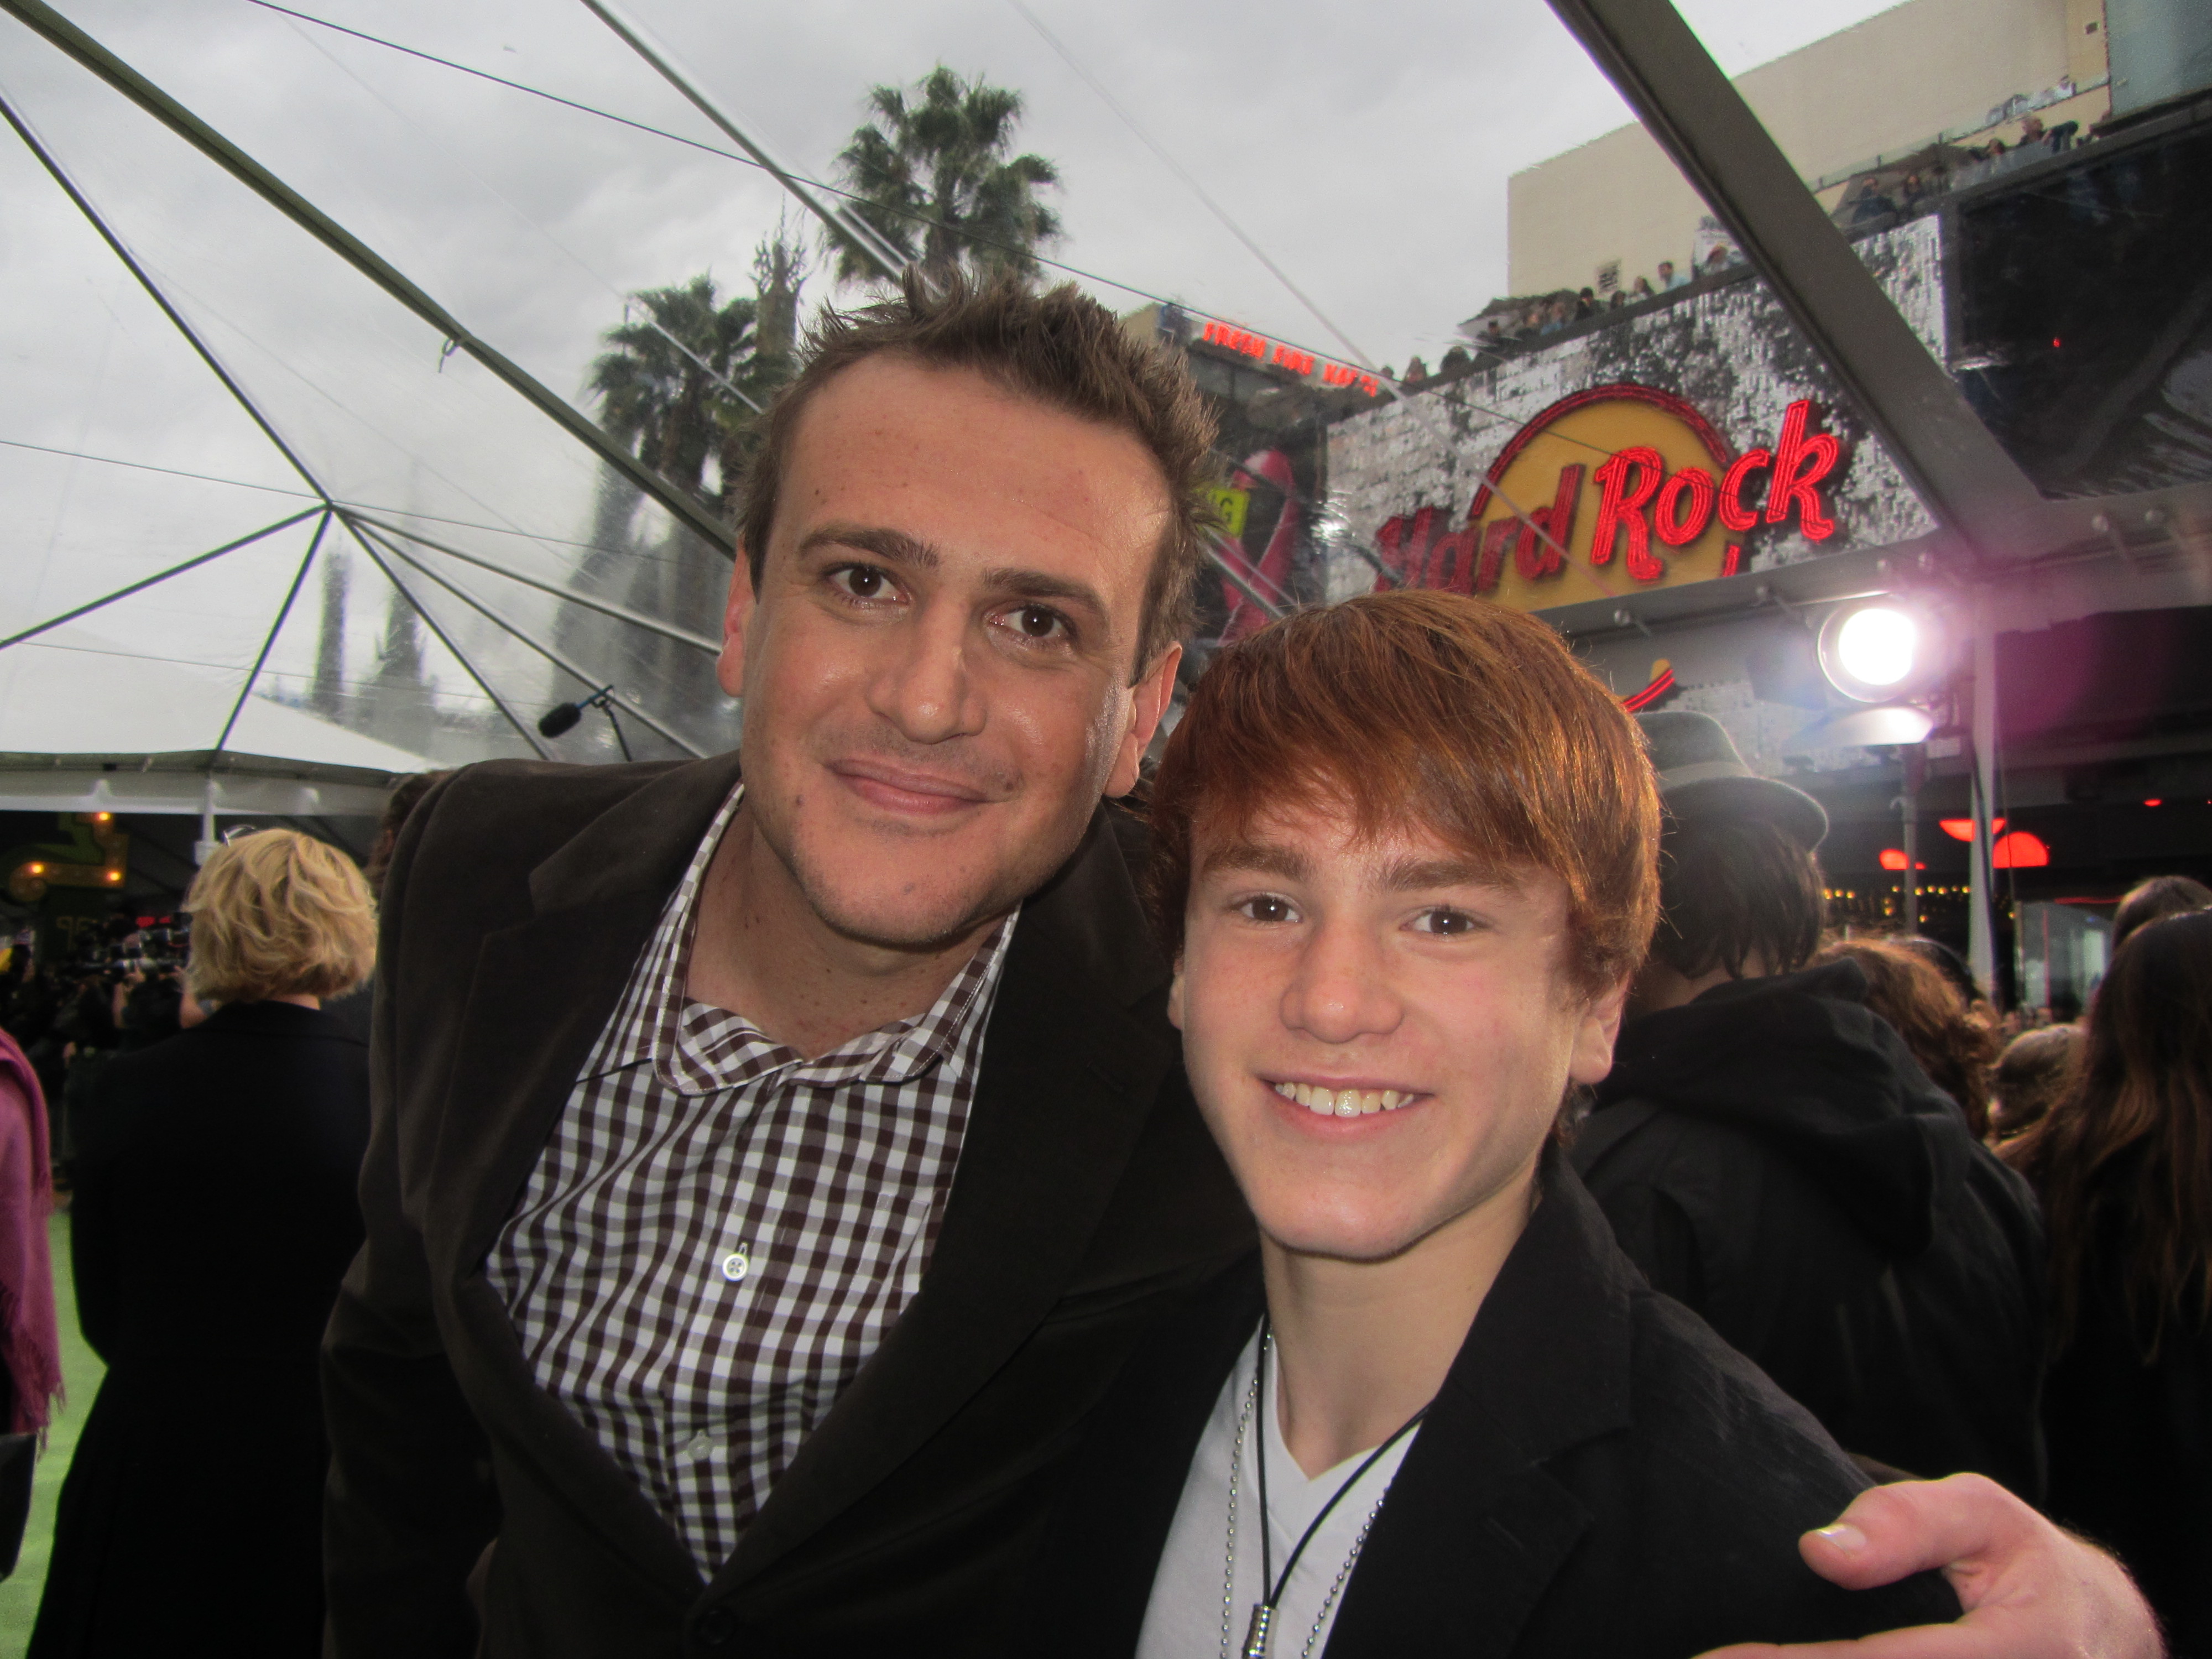 Justin Tinucci with Jason Segal at the premiere of The Muppets November 12 2011 at the El Capitan Theatre, Hollywood.